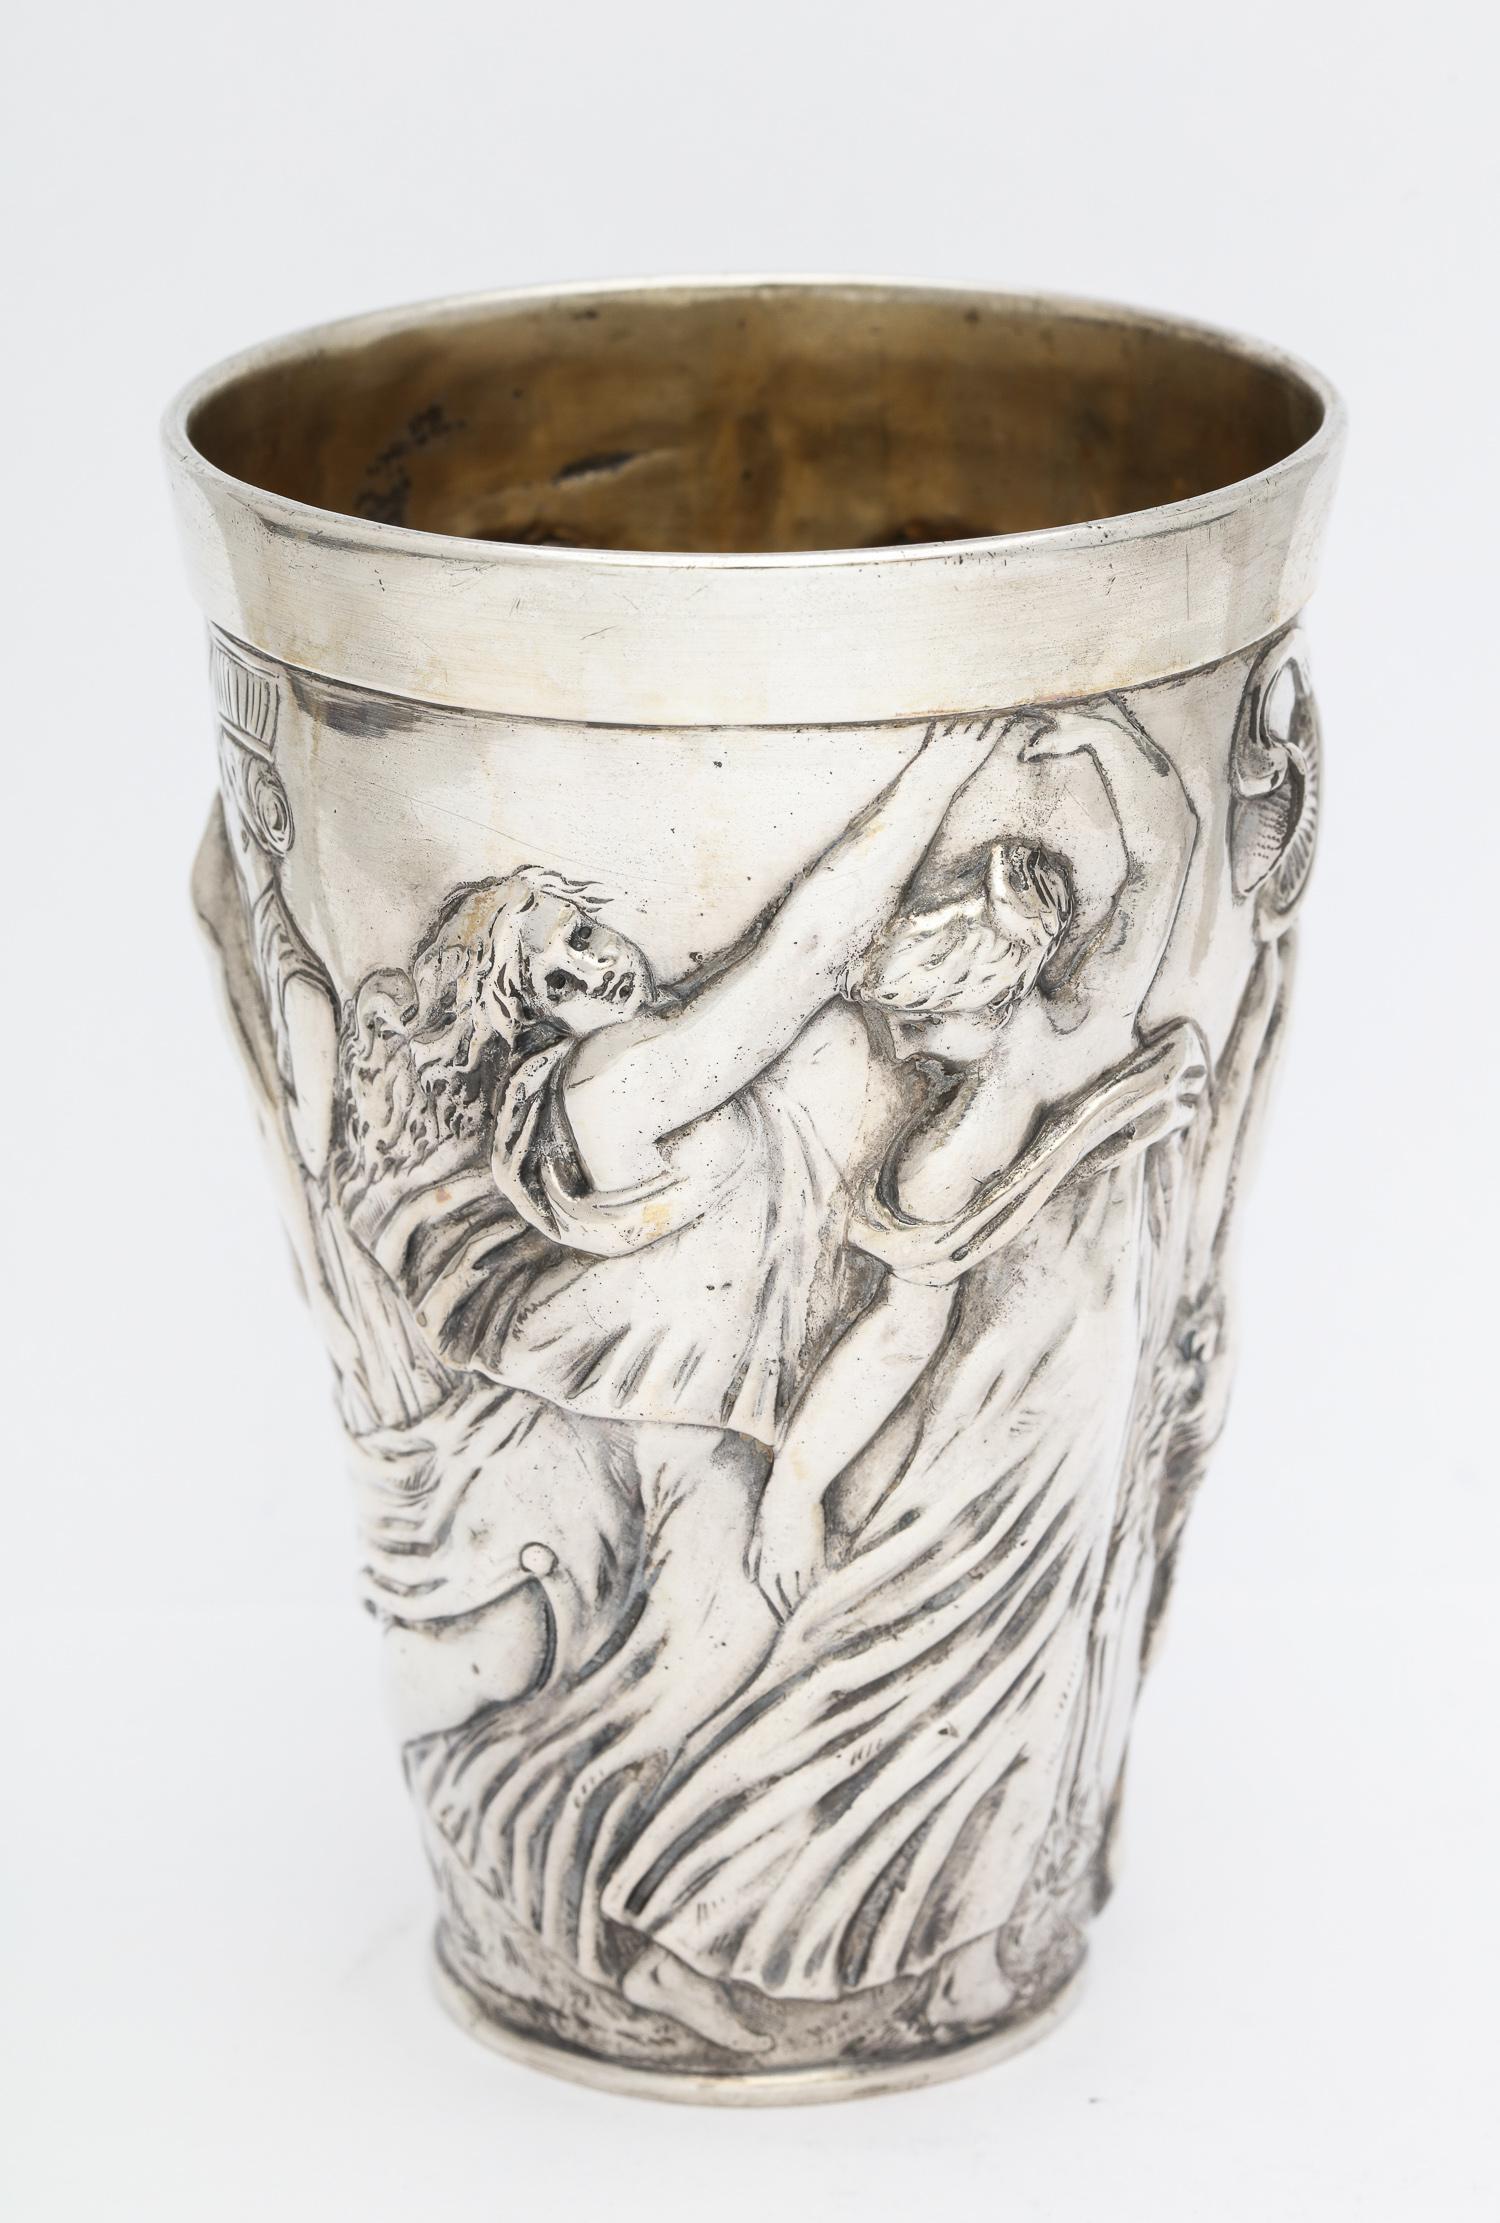 Hanau, Continental Silver (.800) beaker, Germany, circa 1900, Stork and Shinsheimer - makers. Decorated with a Bacchanalian scene. Measures 4 1/2 inches high x over 3 inches in diameter. Weighs 6.070 troy ounces. Lightly gilded interior. Dark spots